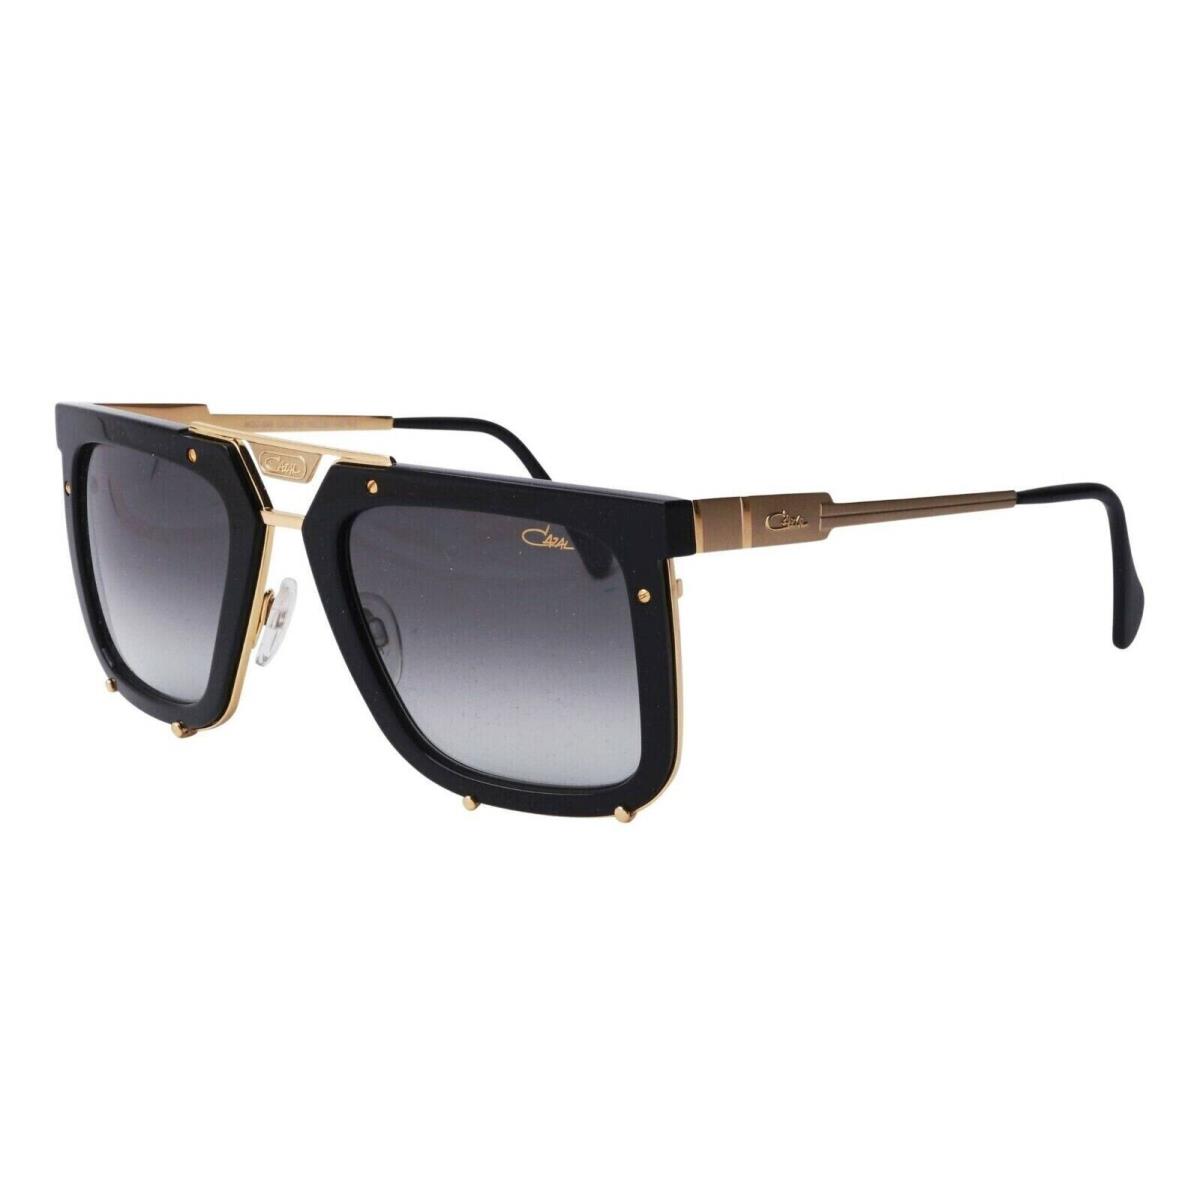 Cazal Legends Mod. 648 Col. 001 Black Gold Plated Sunglasses Made IN Germany